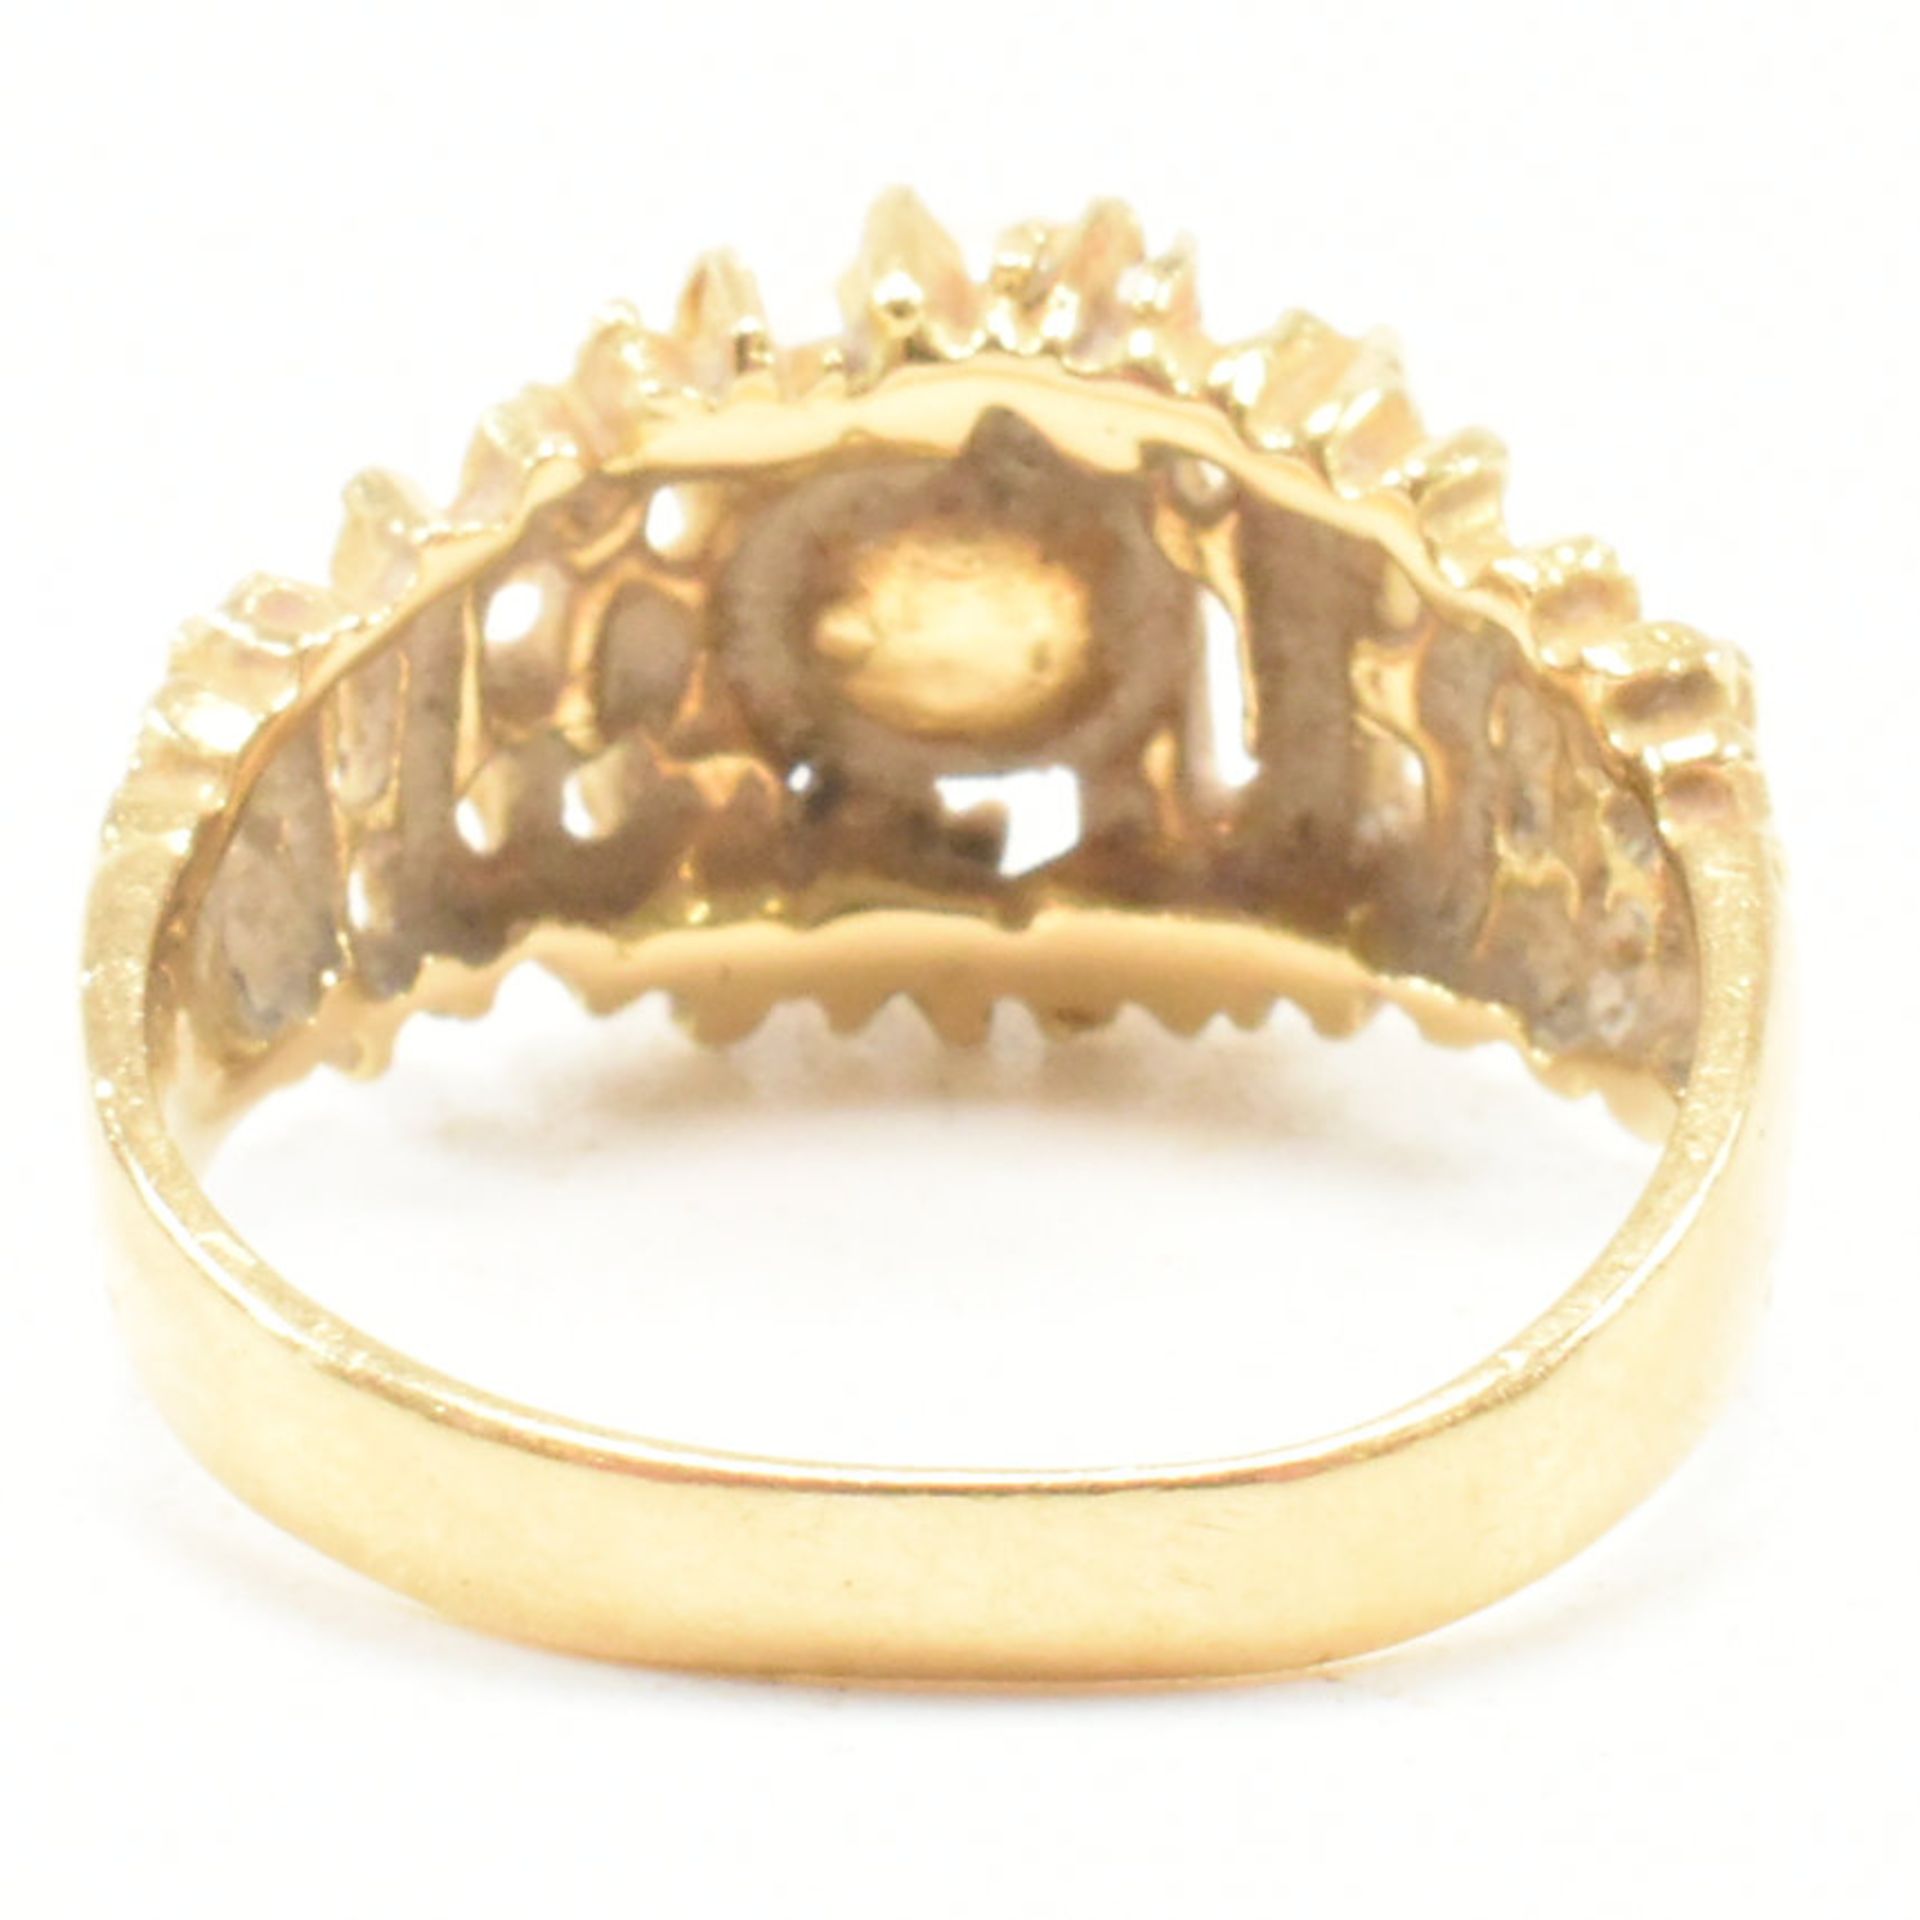 VINTAGE 18CT GOLD & PEARL DRESS RING - Image 2 of 7